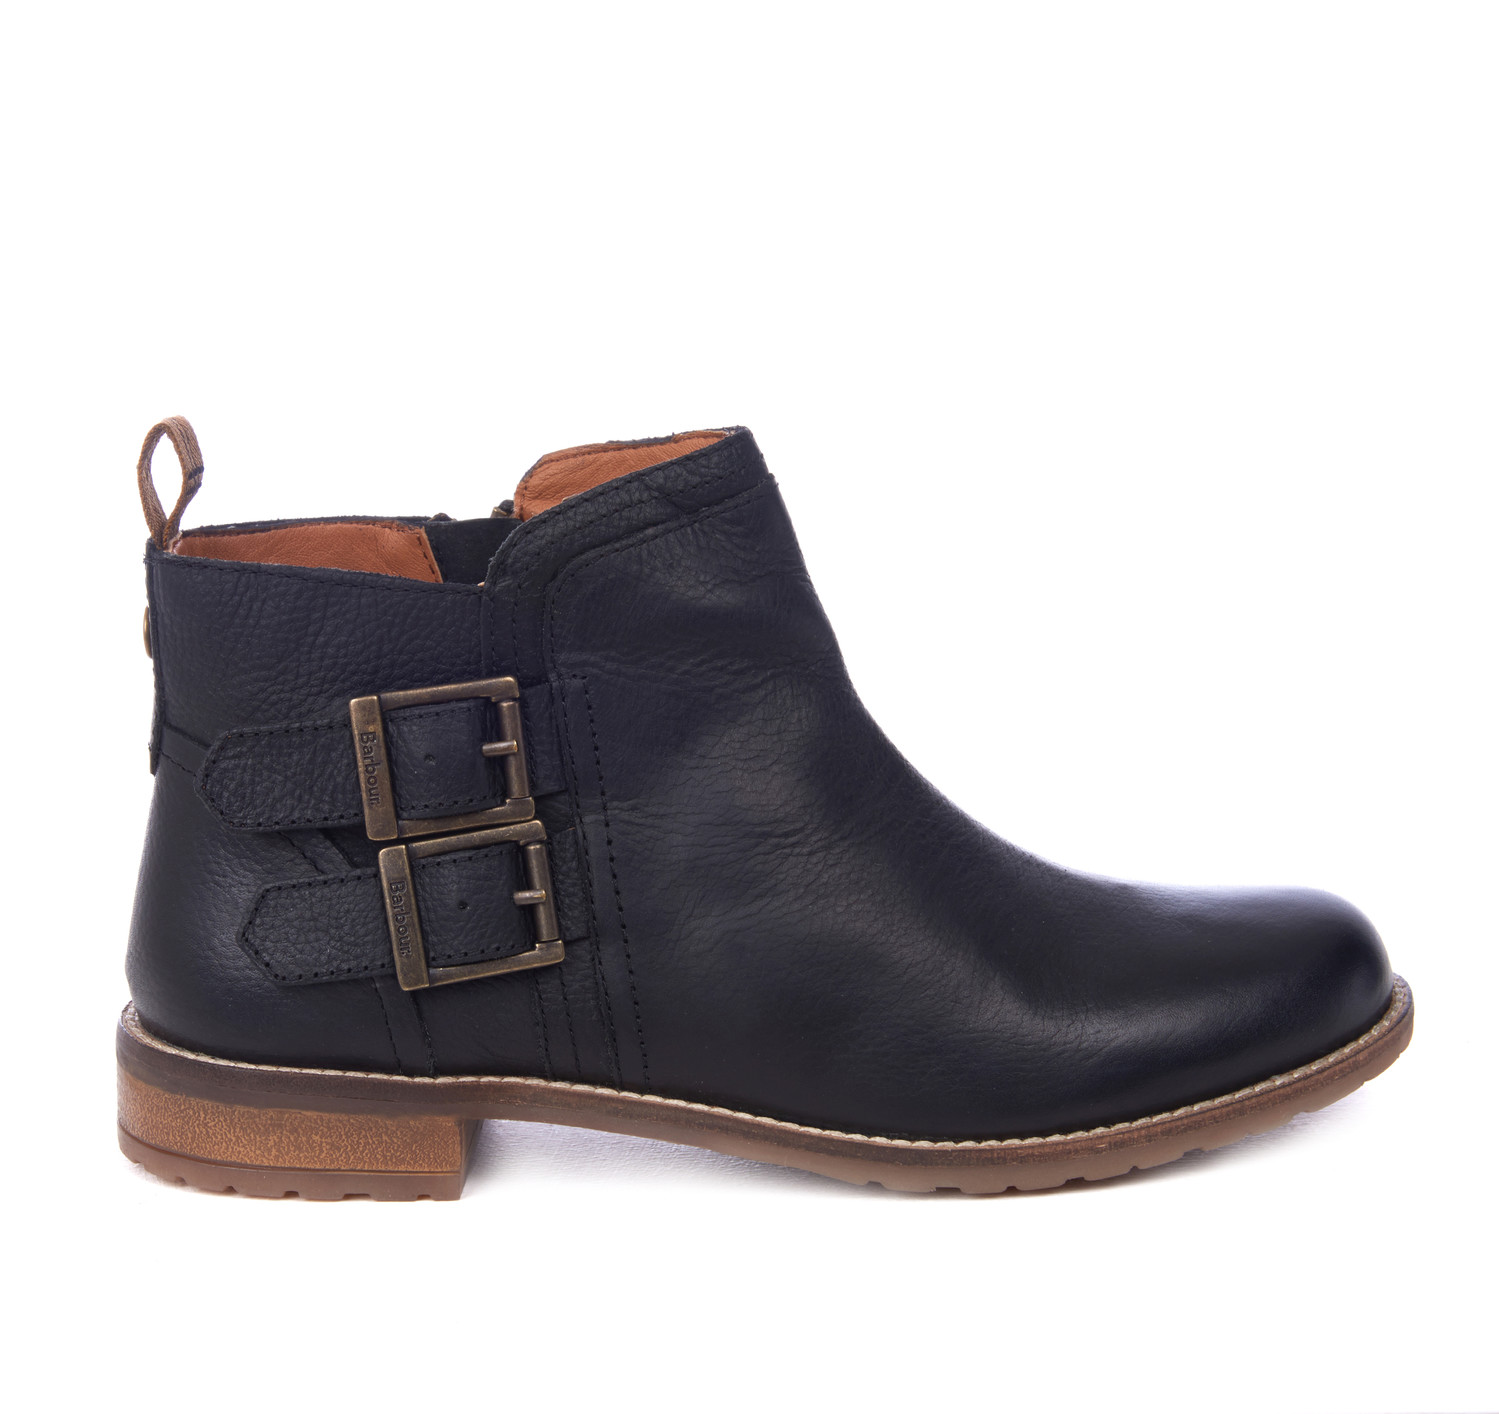 Barbour Sarah Low Buckle Boots for Her